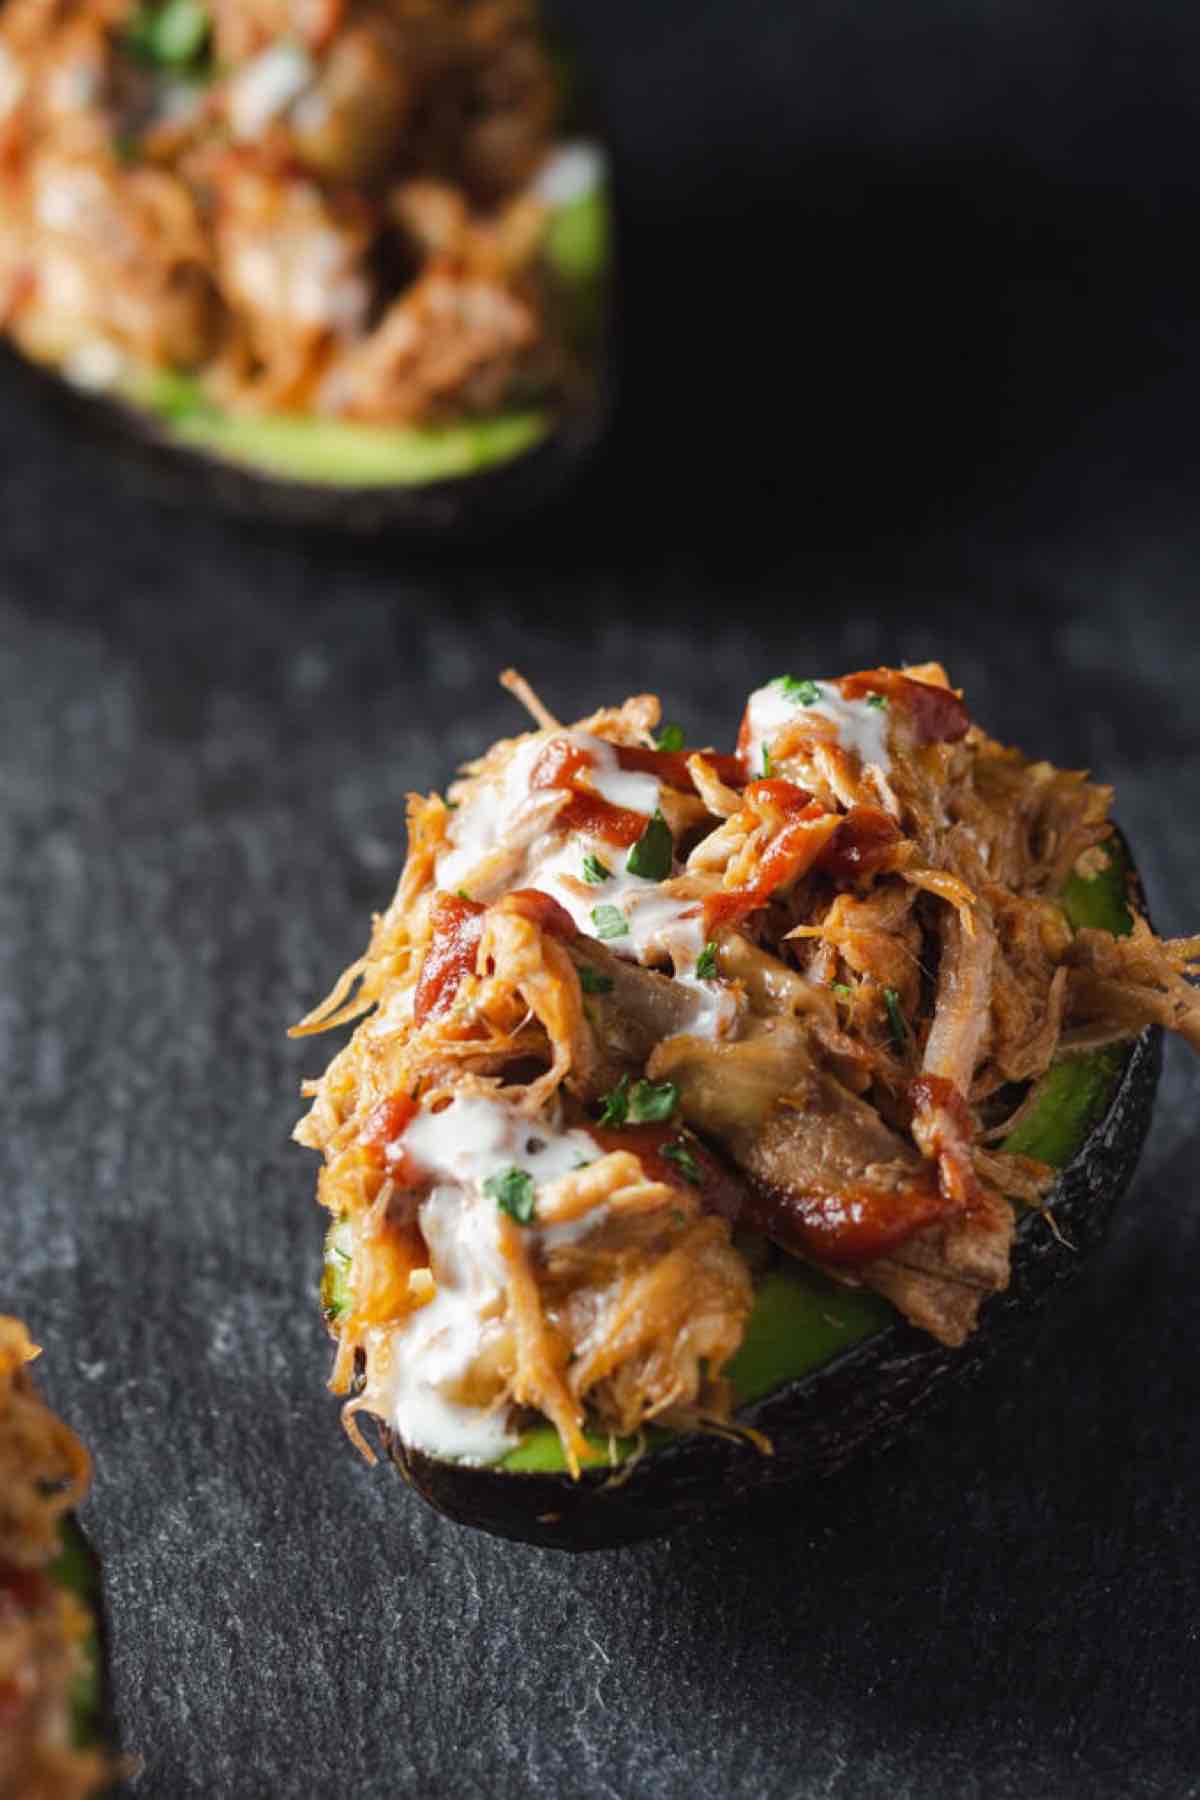 halved avocado filled with pulled pork and spice.